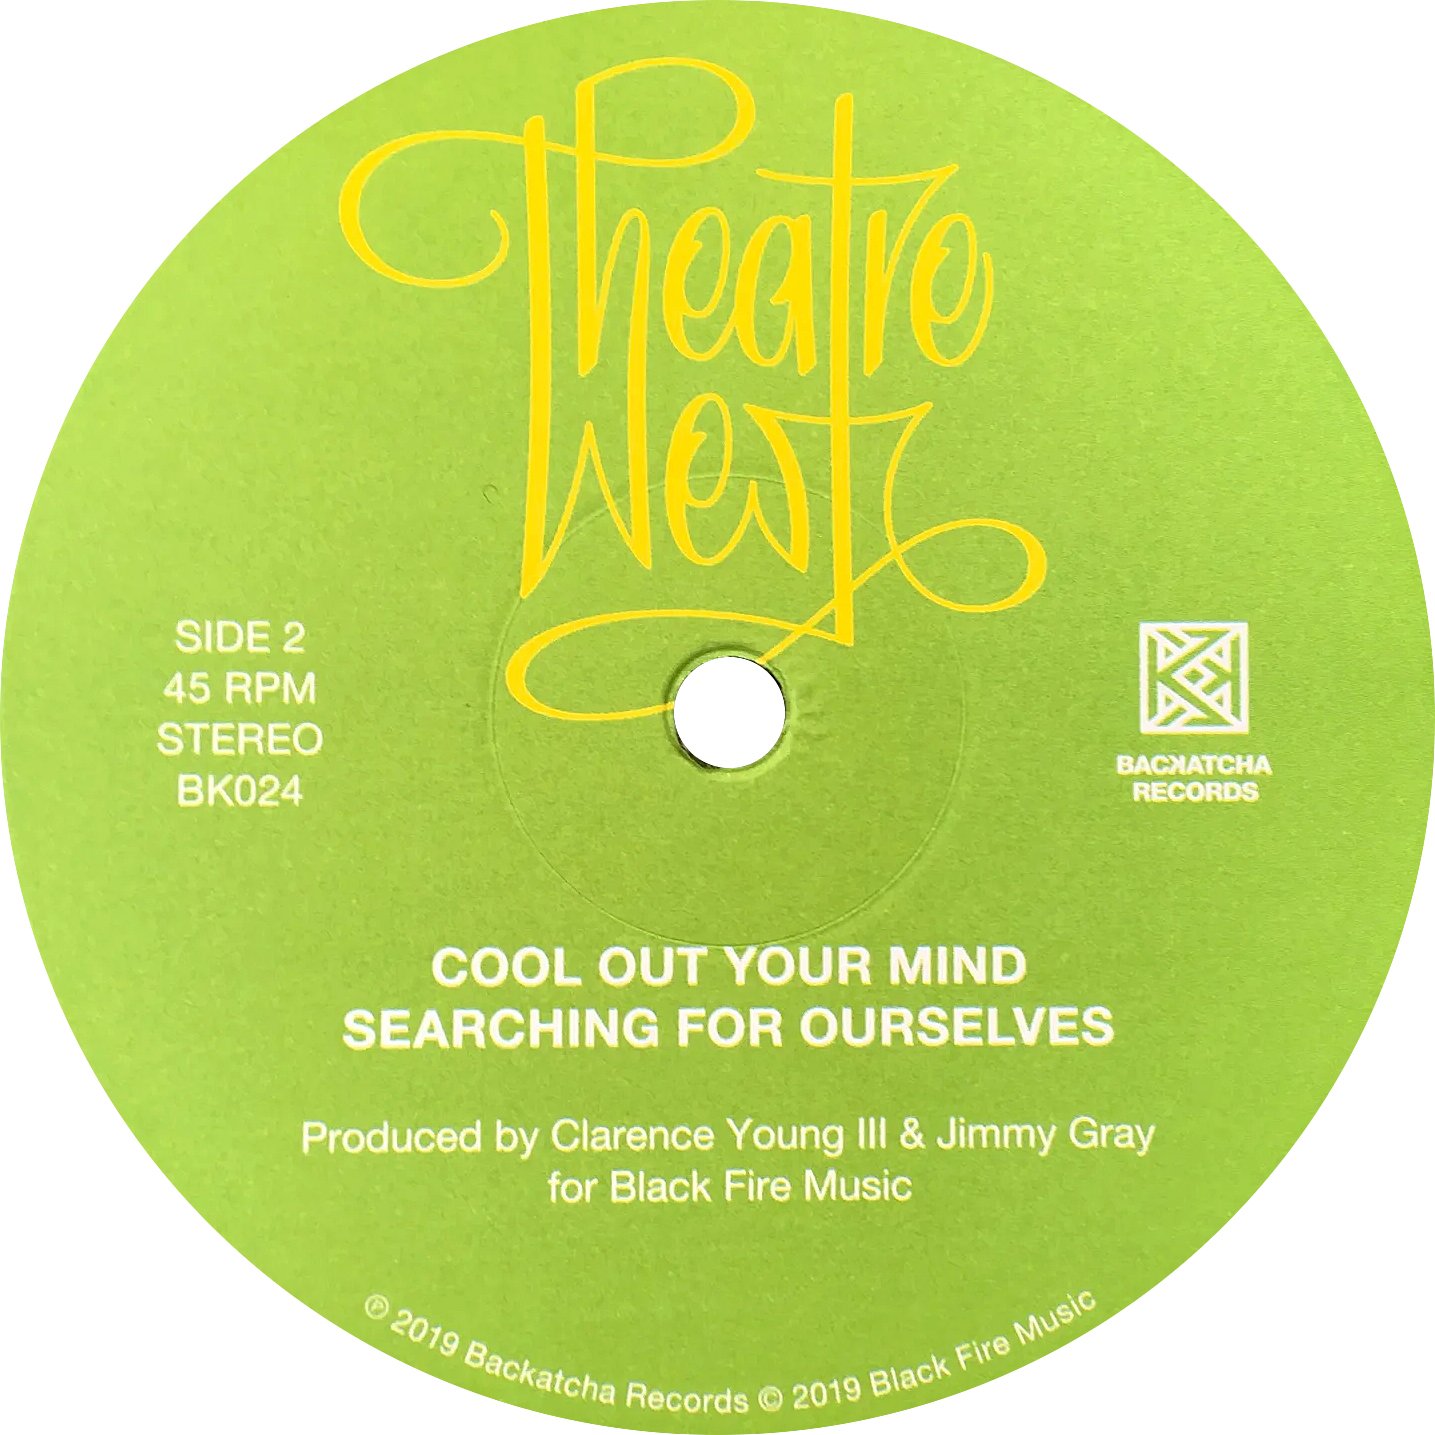 Image of Theatre West Limited 12" EP